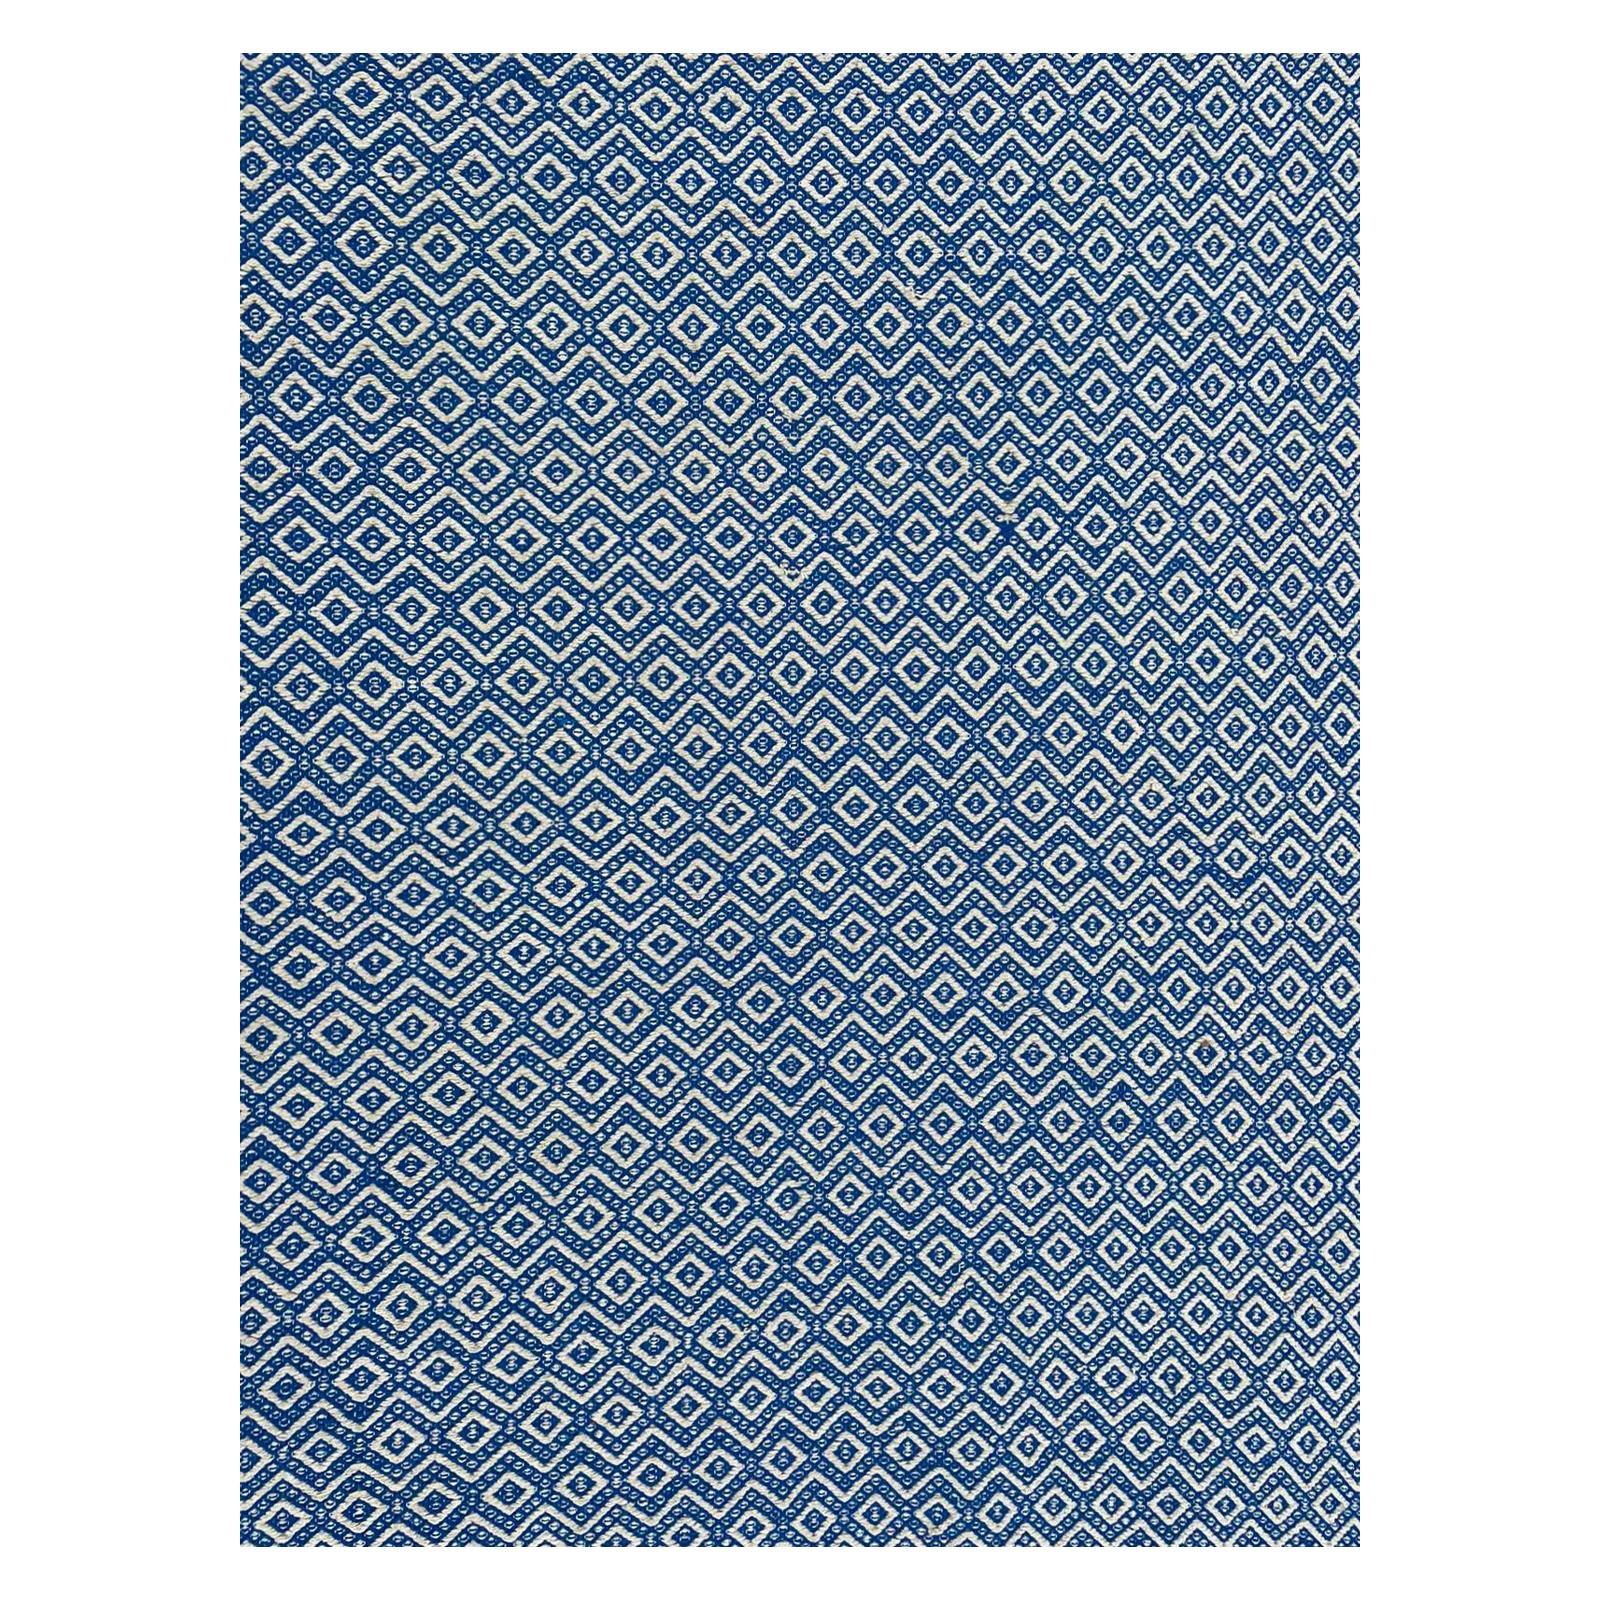 Oversized Blue and White Flat-Weave Indian Kilim by Gordian Rugs